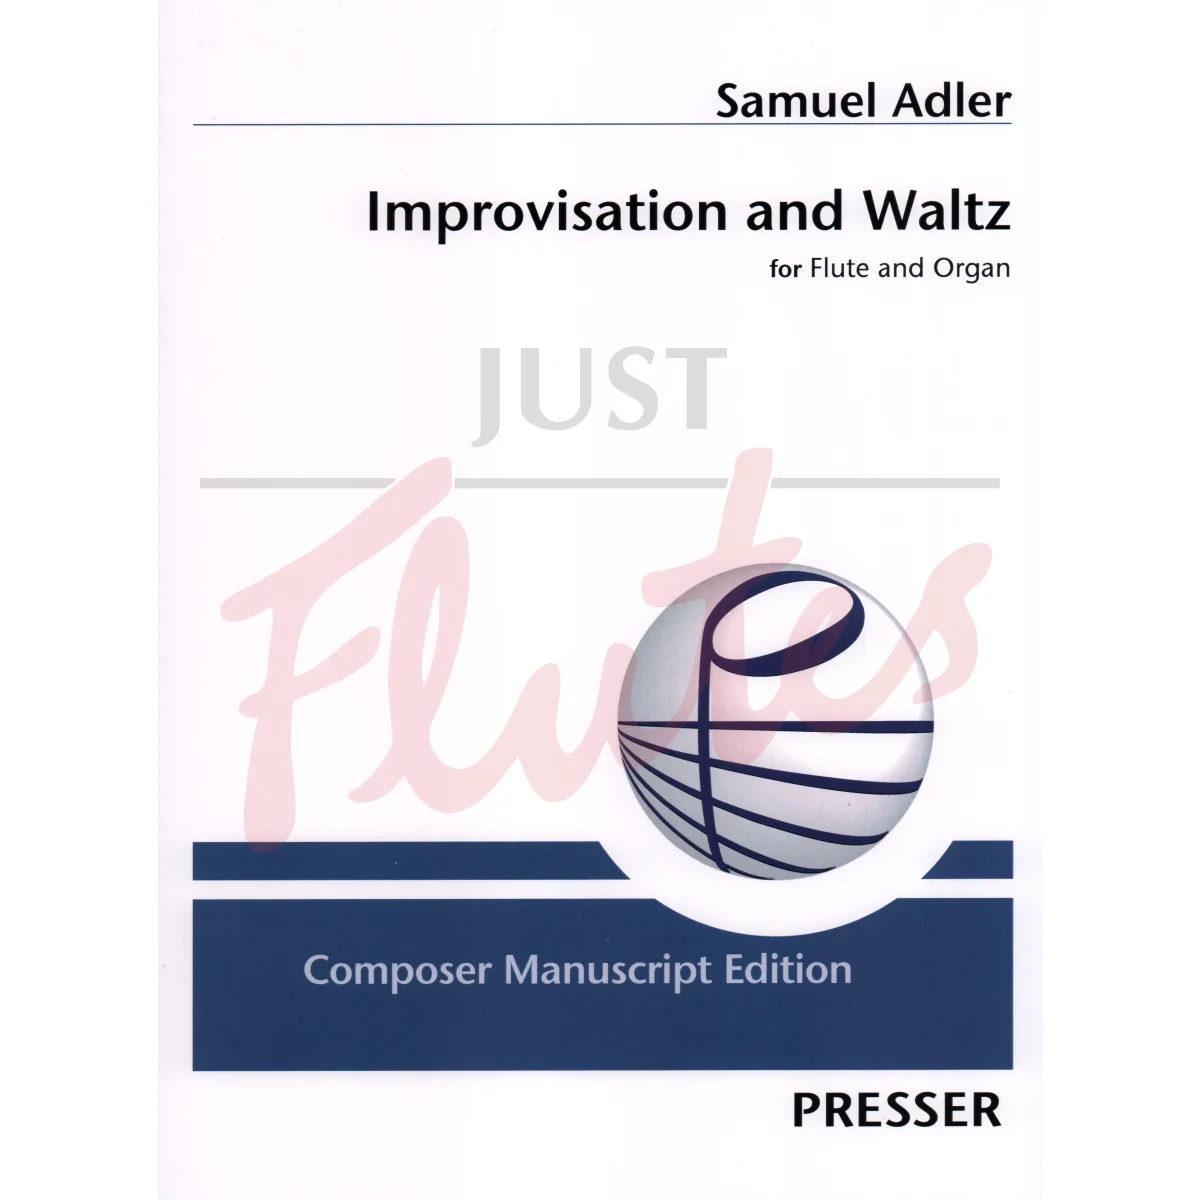 Improvisation and Waltz for Flute and Organ